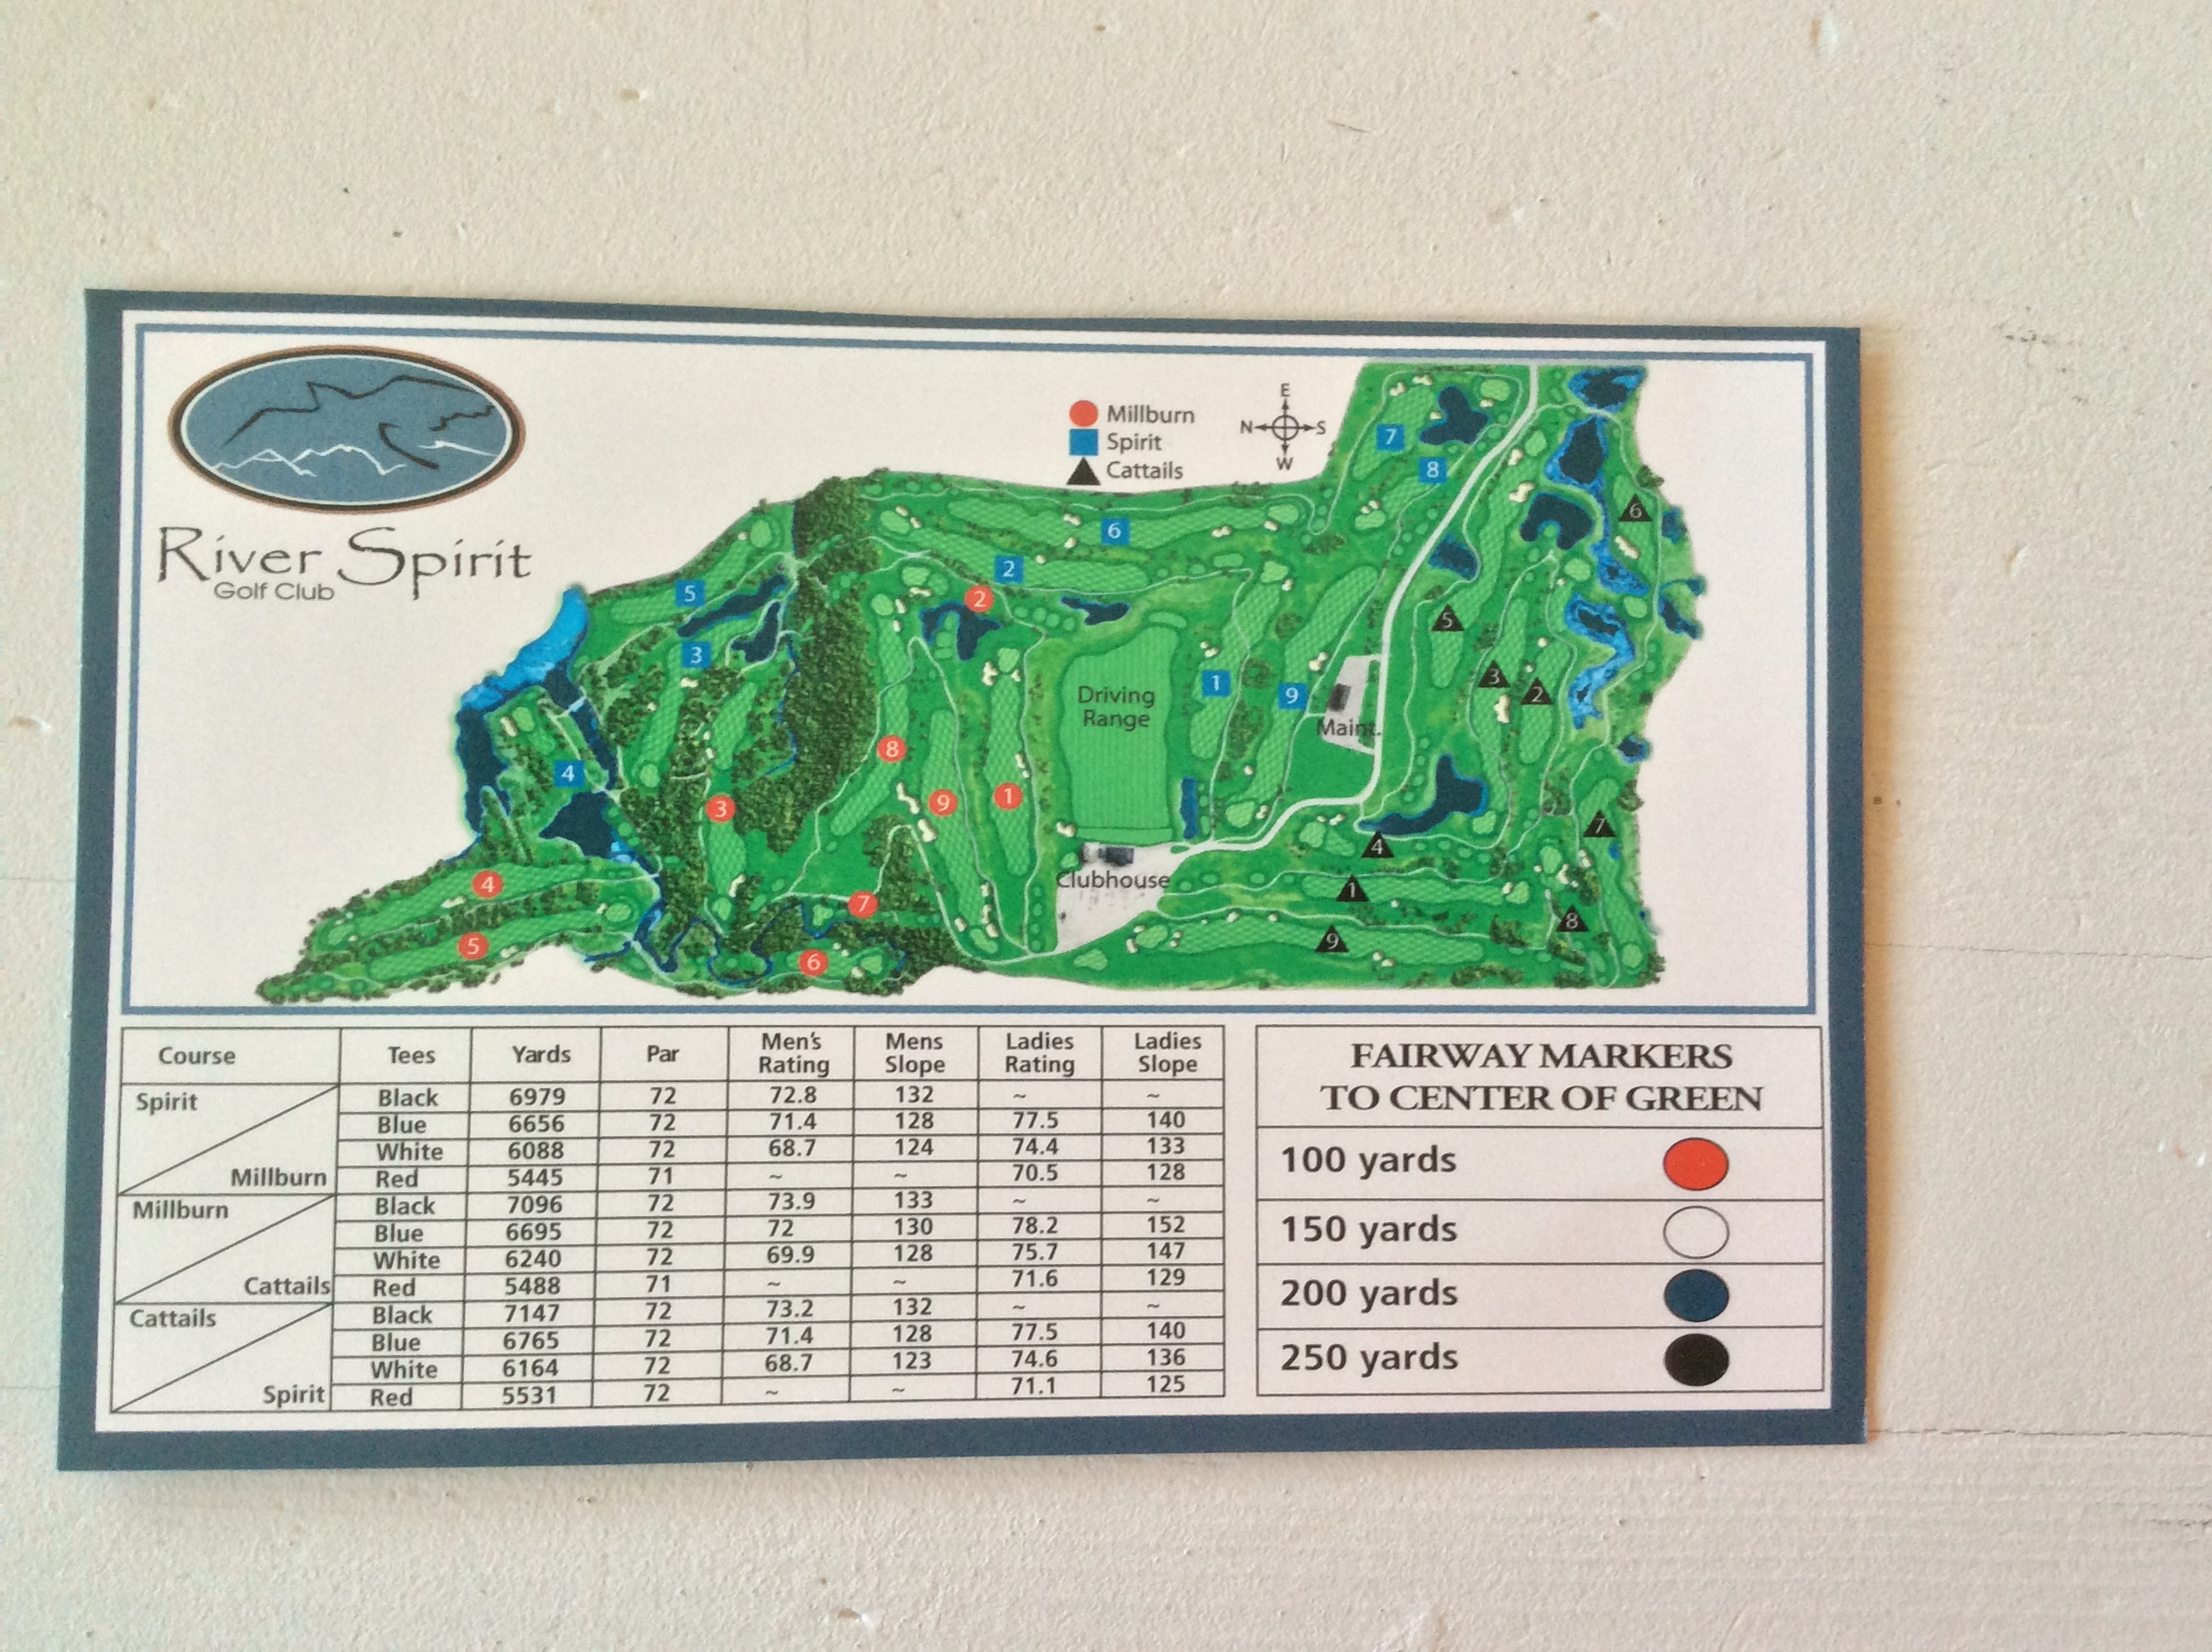 River Spirit Golf Course - Rating and Slope for men and ladies for each sets of tees. As there are 27 holes the chart shows the combination of nines that make up the rotation for 18 hole play.